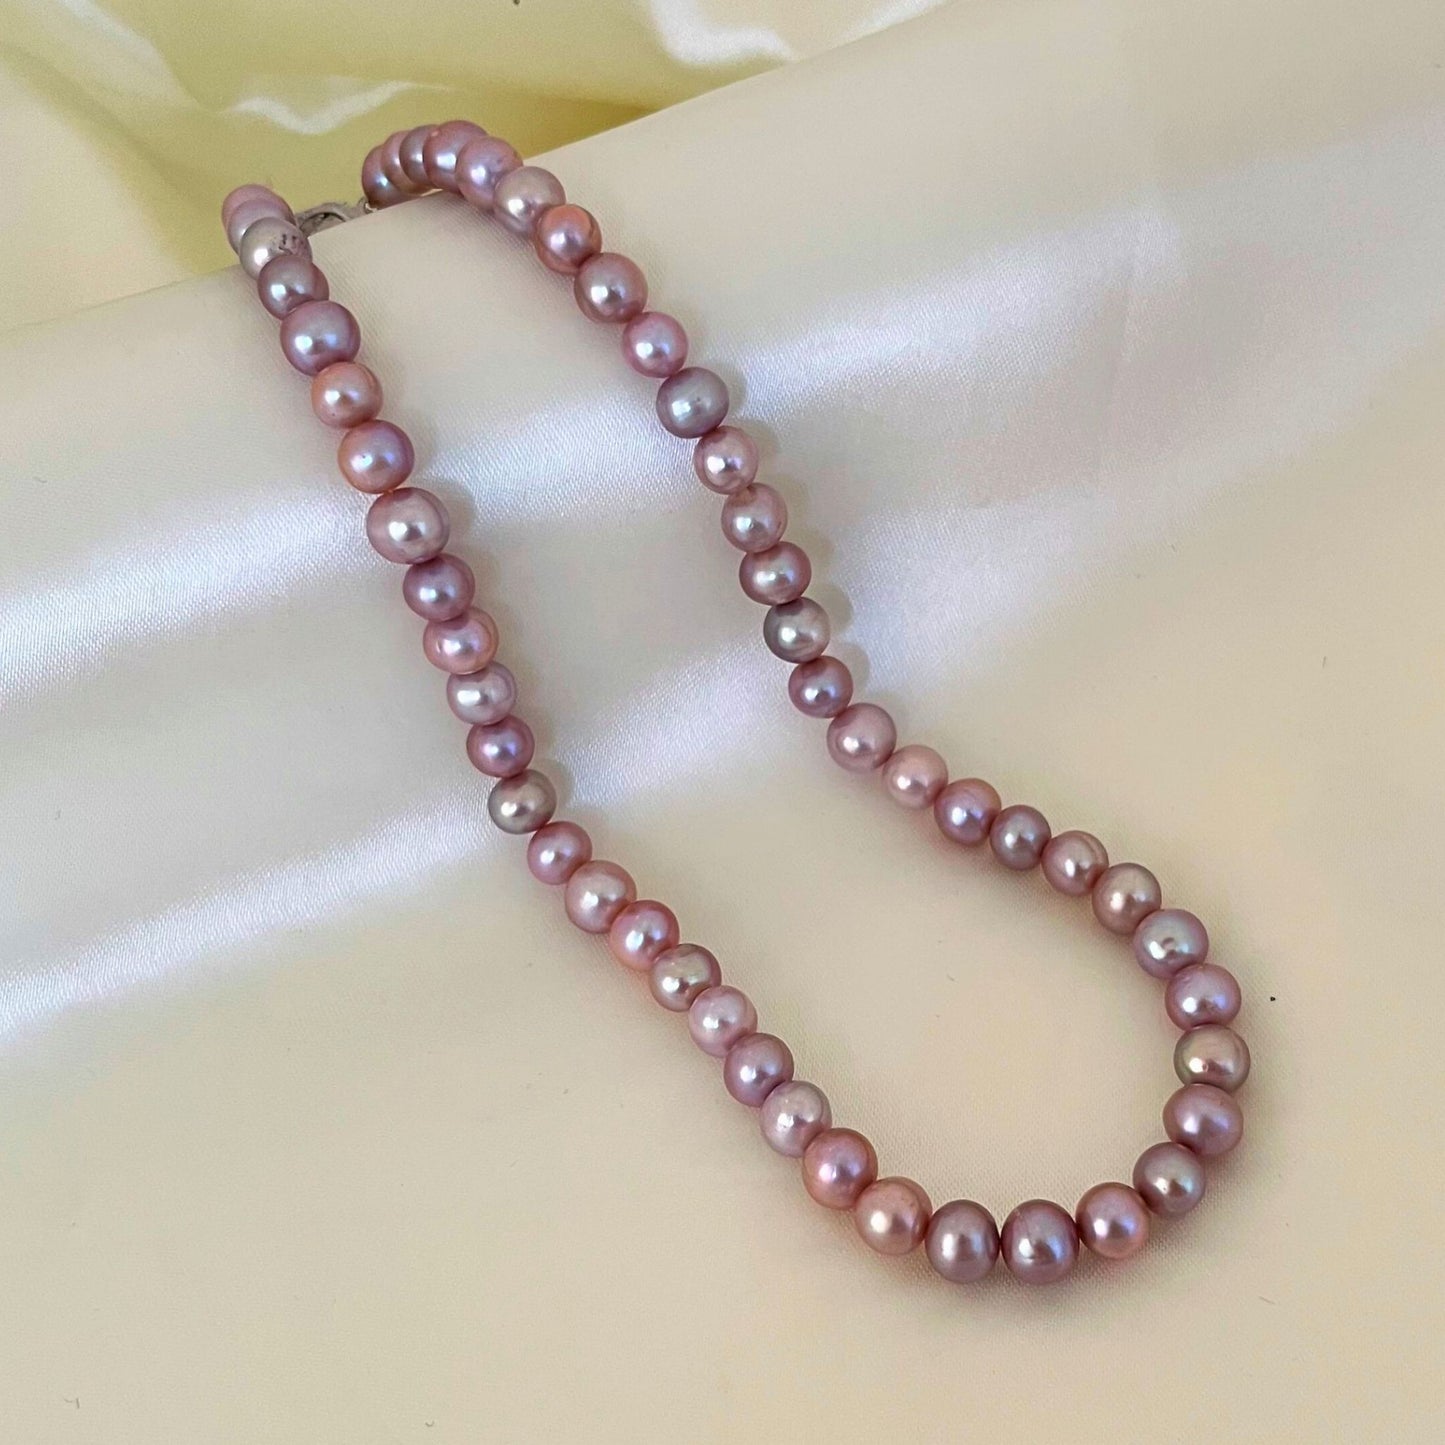 Lavender Pearl Necklace with Silver Overtone